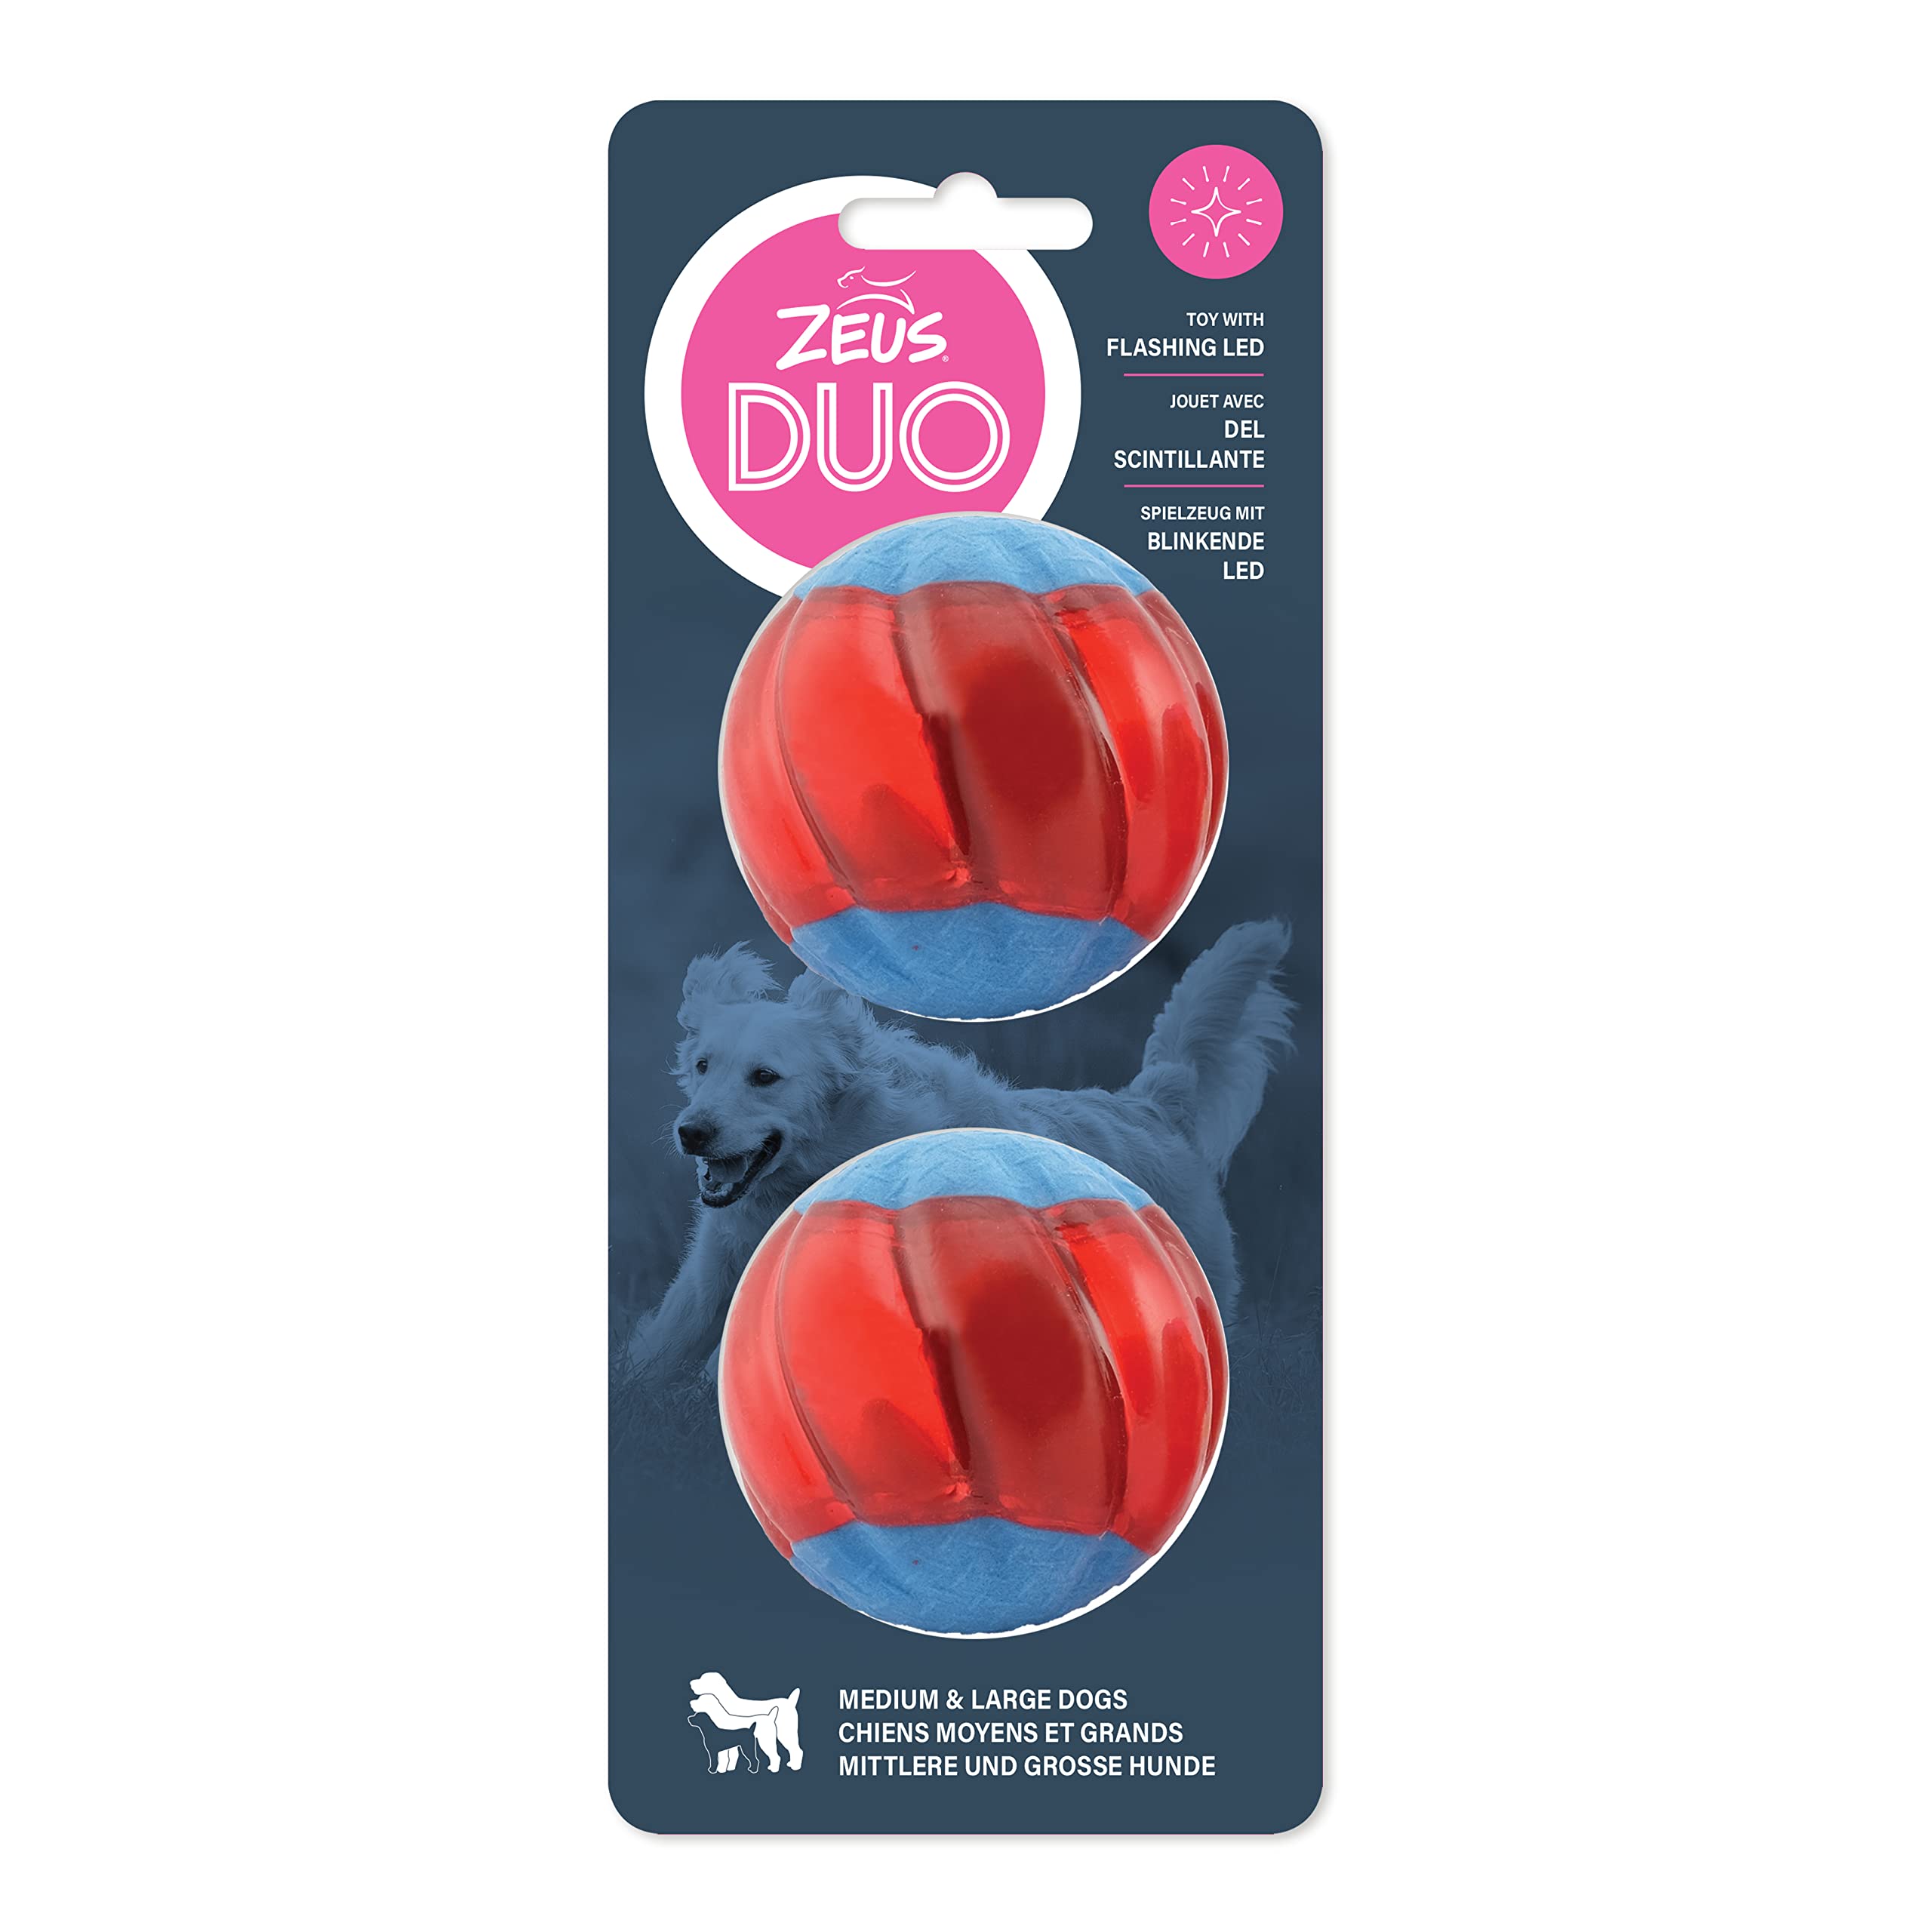 ZEUS Duo Balls with LED, Interactive Dog Toys, Large,96288